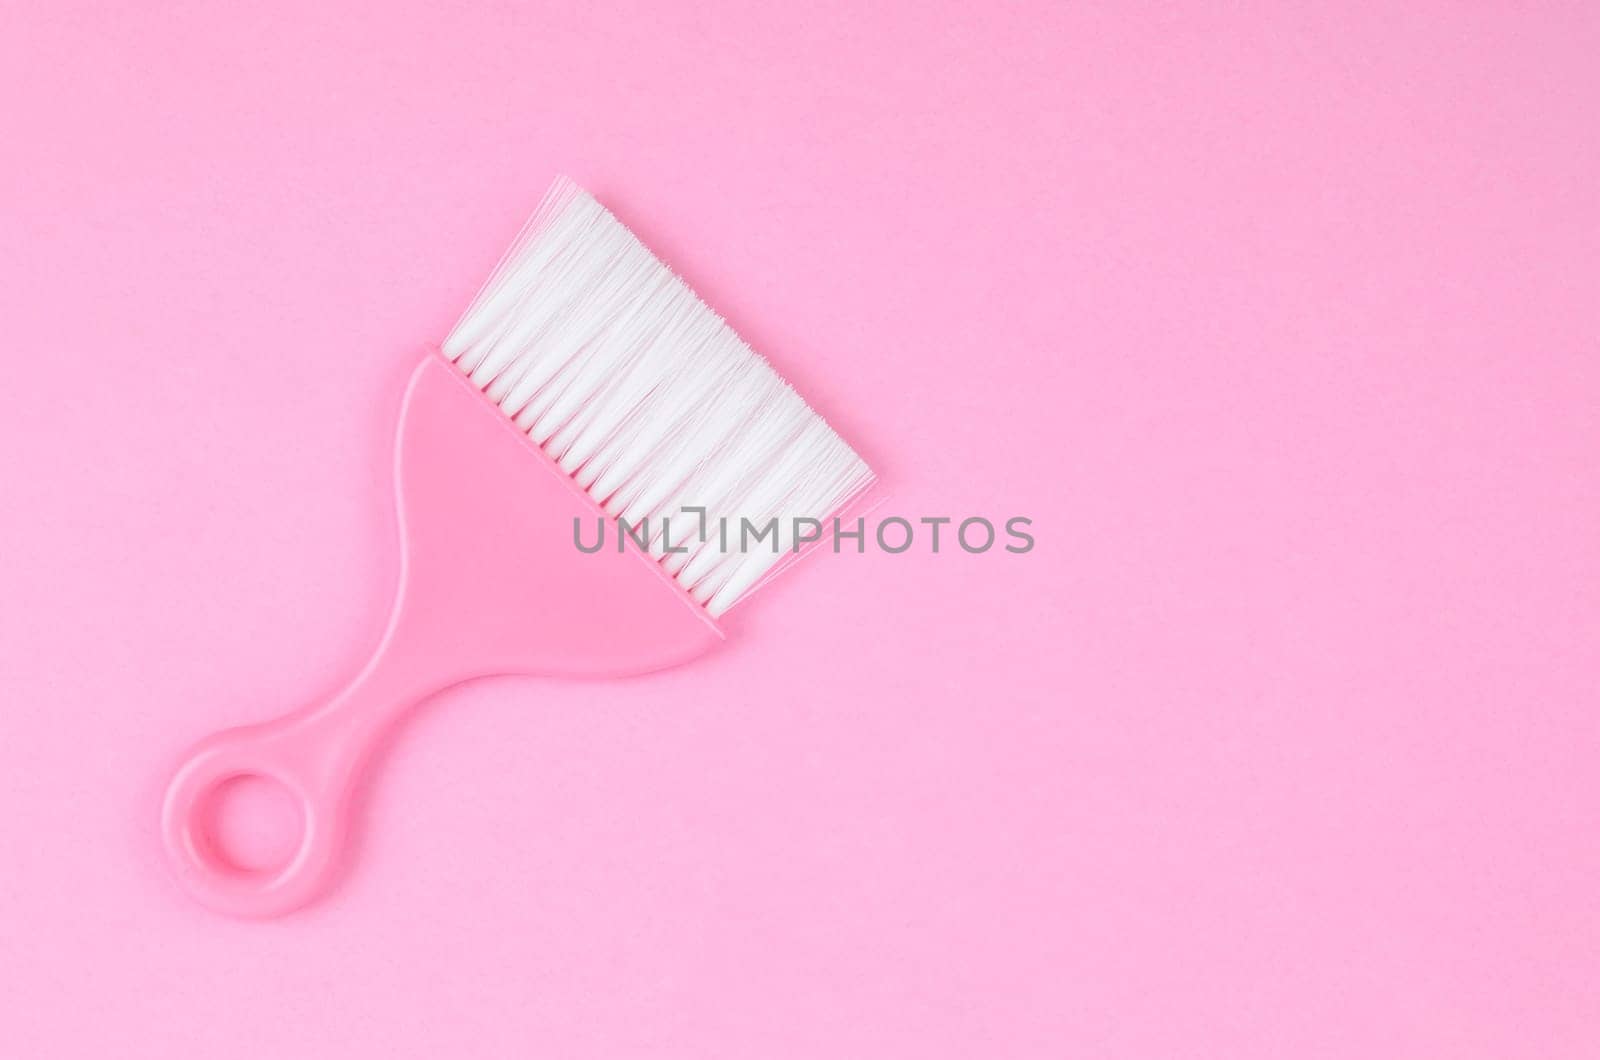 The Pink cleaning brush on pink background. by Gamjai